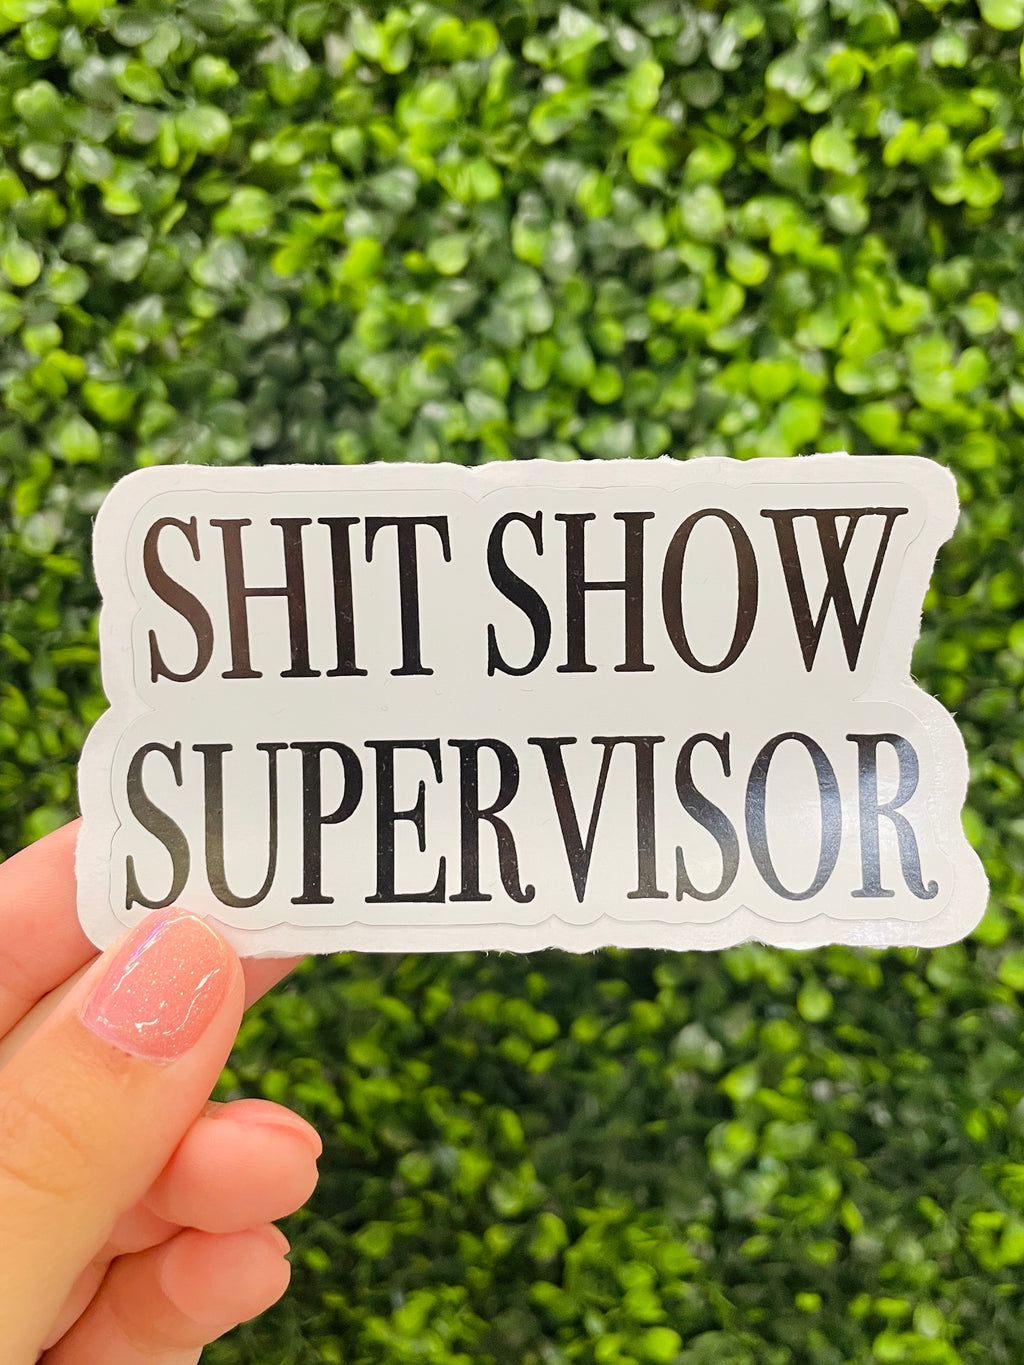 Take control of any situation—even a total "Shit Show"—with this humorous supervisor sticker! The perfect funny gift for your go-to person who manages the chaos, it's just what you need to make sure every mess gets cleaned up! It's a helpful reminder that you don't have to be the one to wrangle the mayhem.